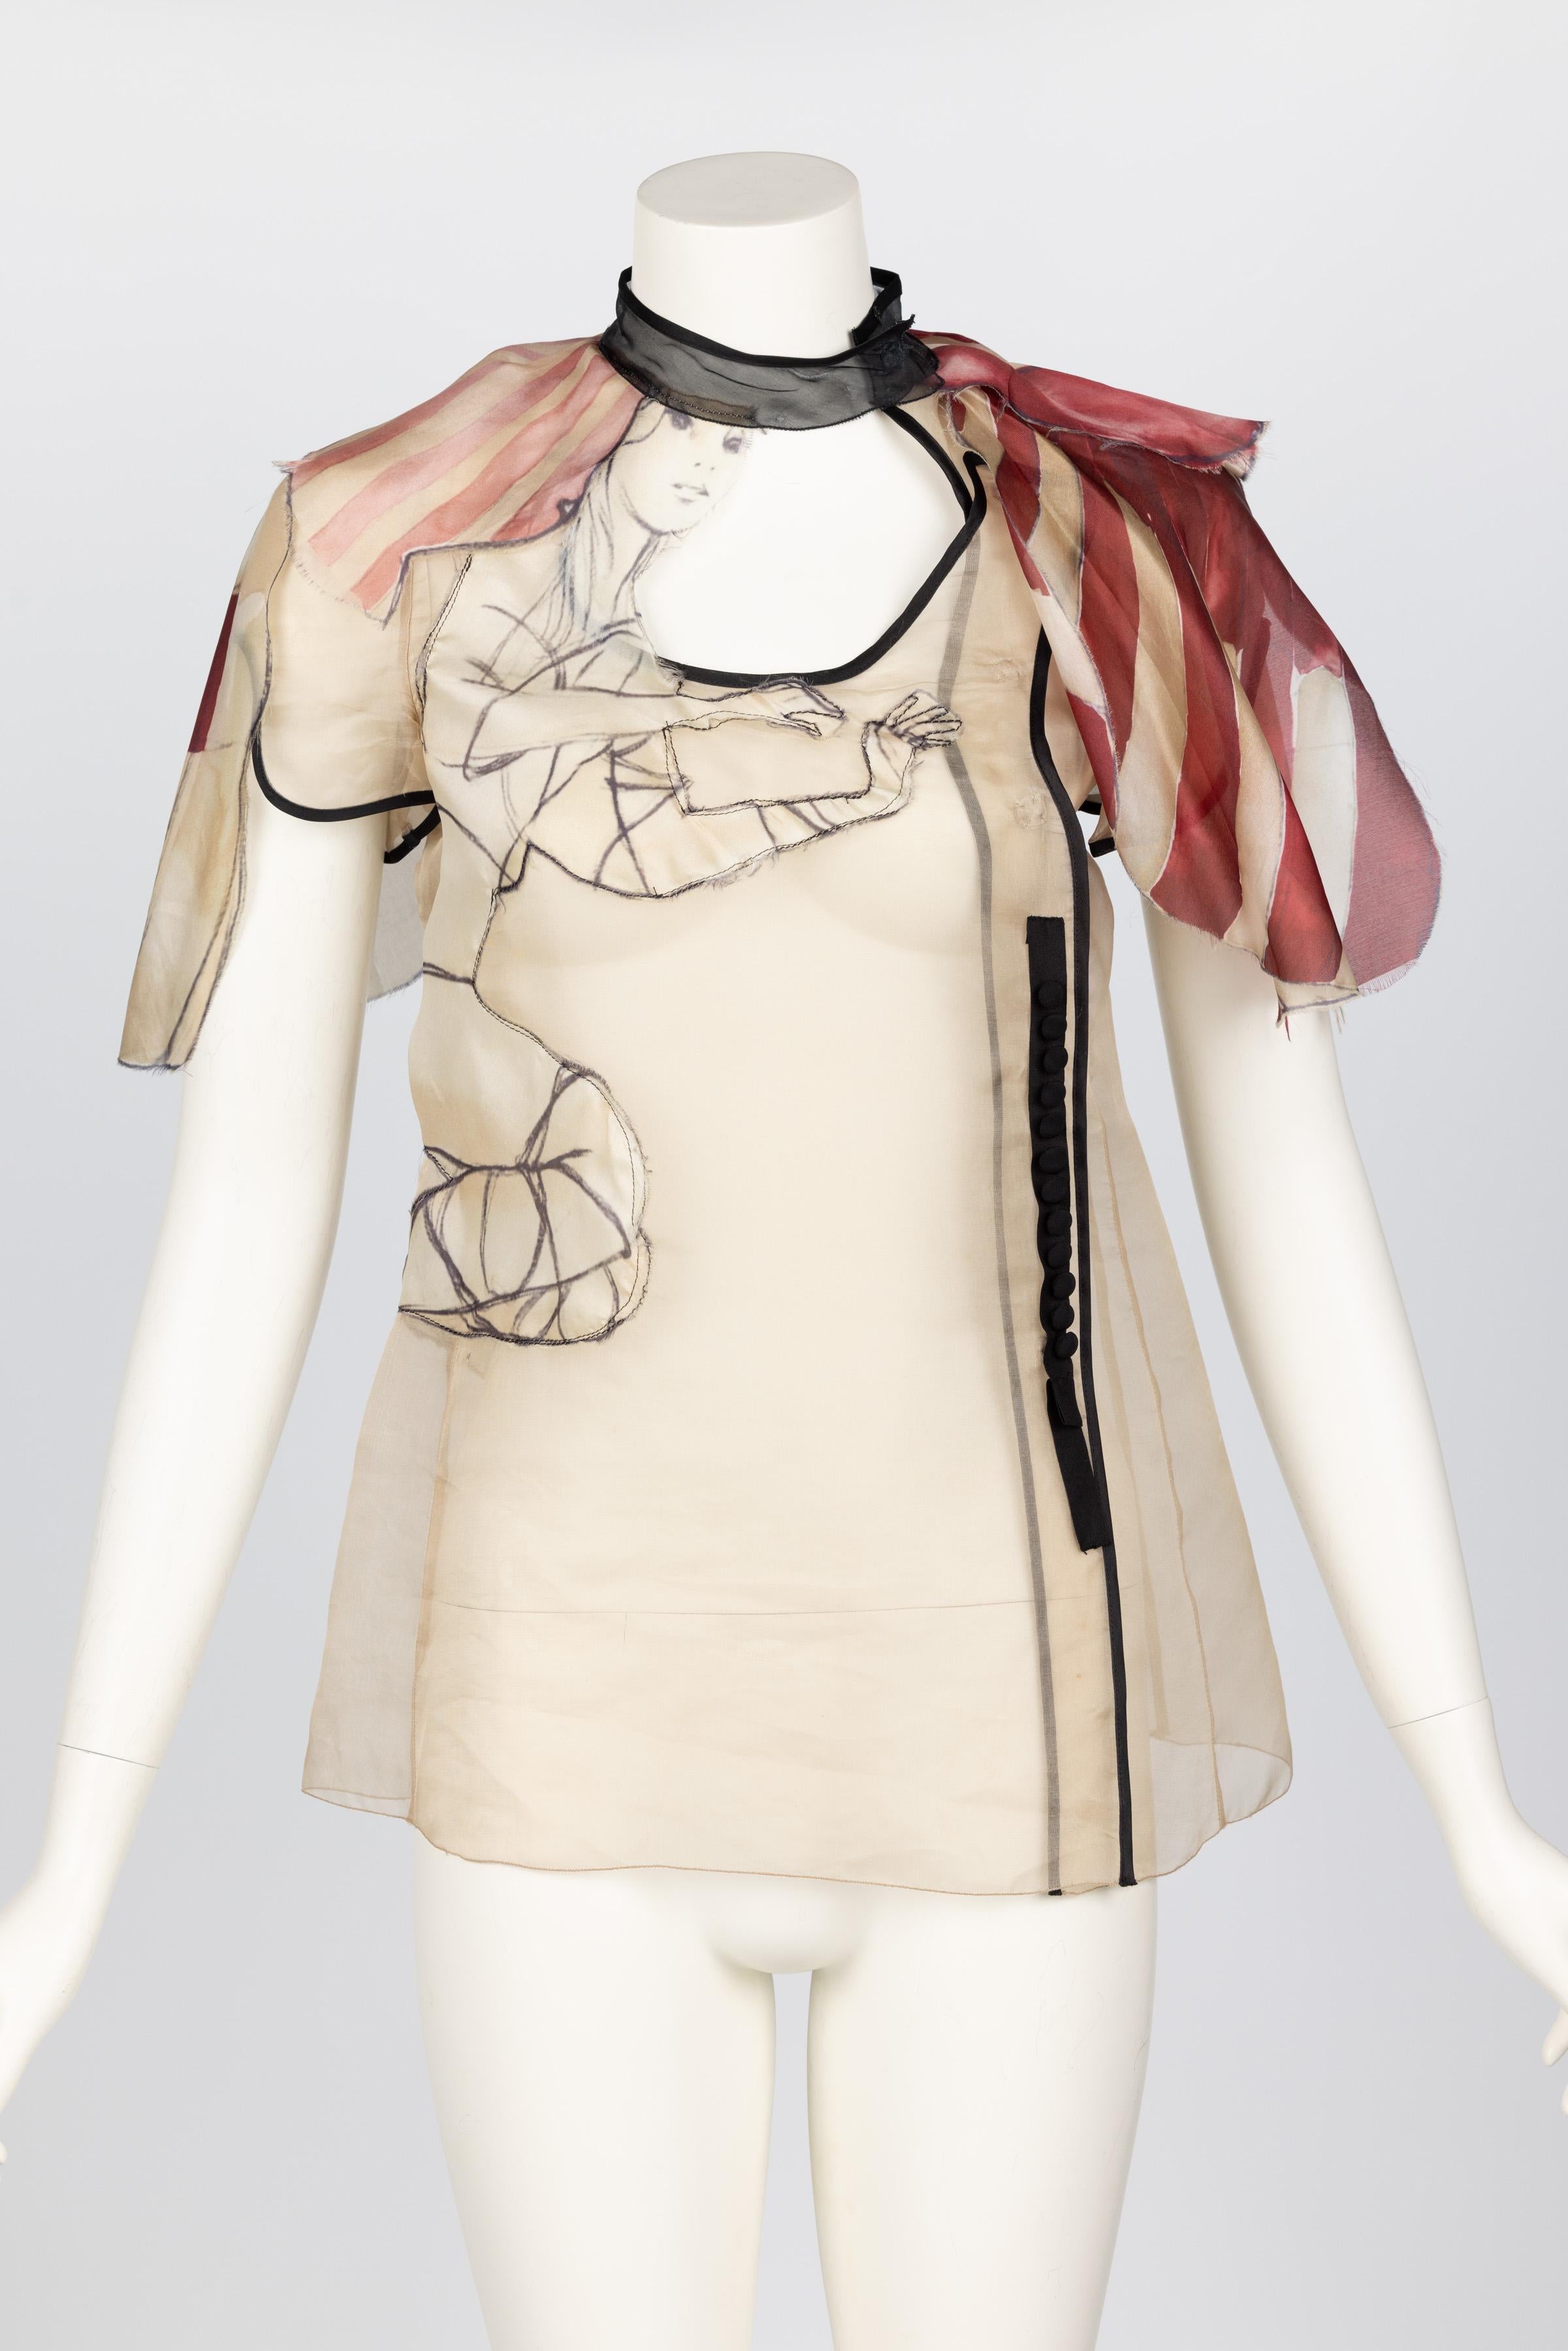 Prada runway look #41 .
Done in a beige silk organza, the blouse is transparent with a black ribbon trim, choker, fabric button fastenings, and caplet sleeves.

Some color bleed & color transfer on the back of the shirt,  2 small holes on the back